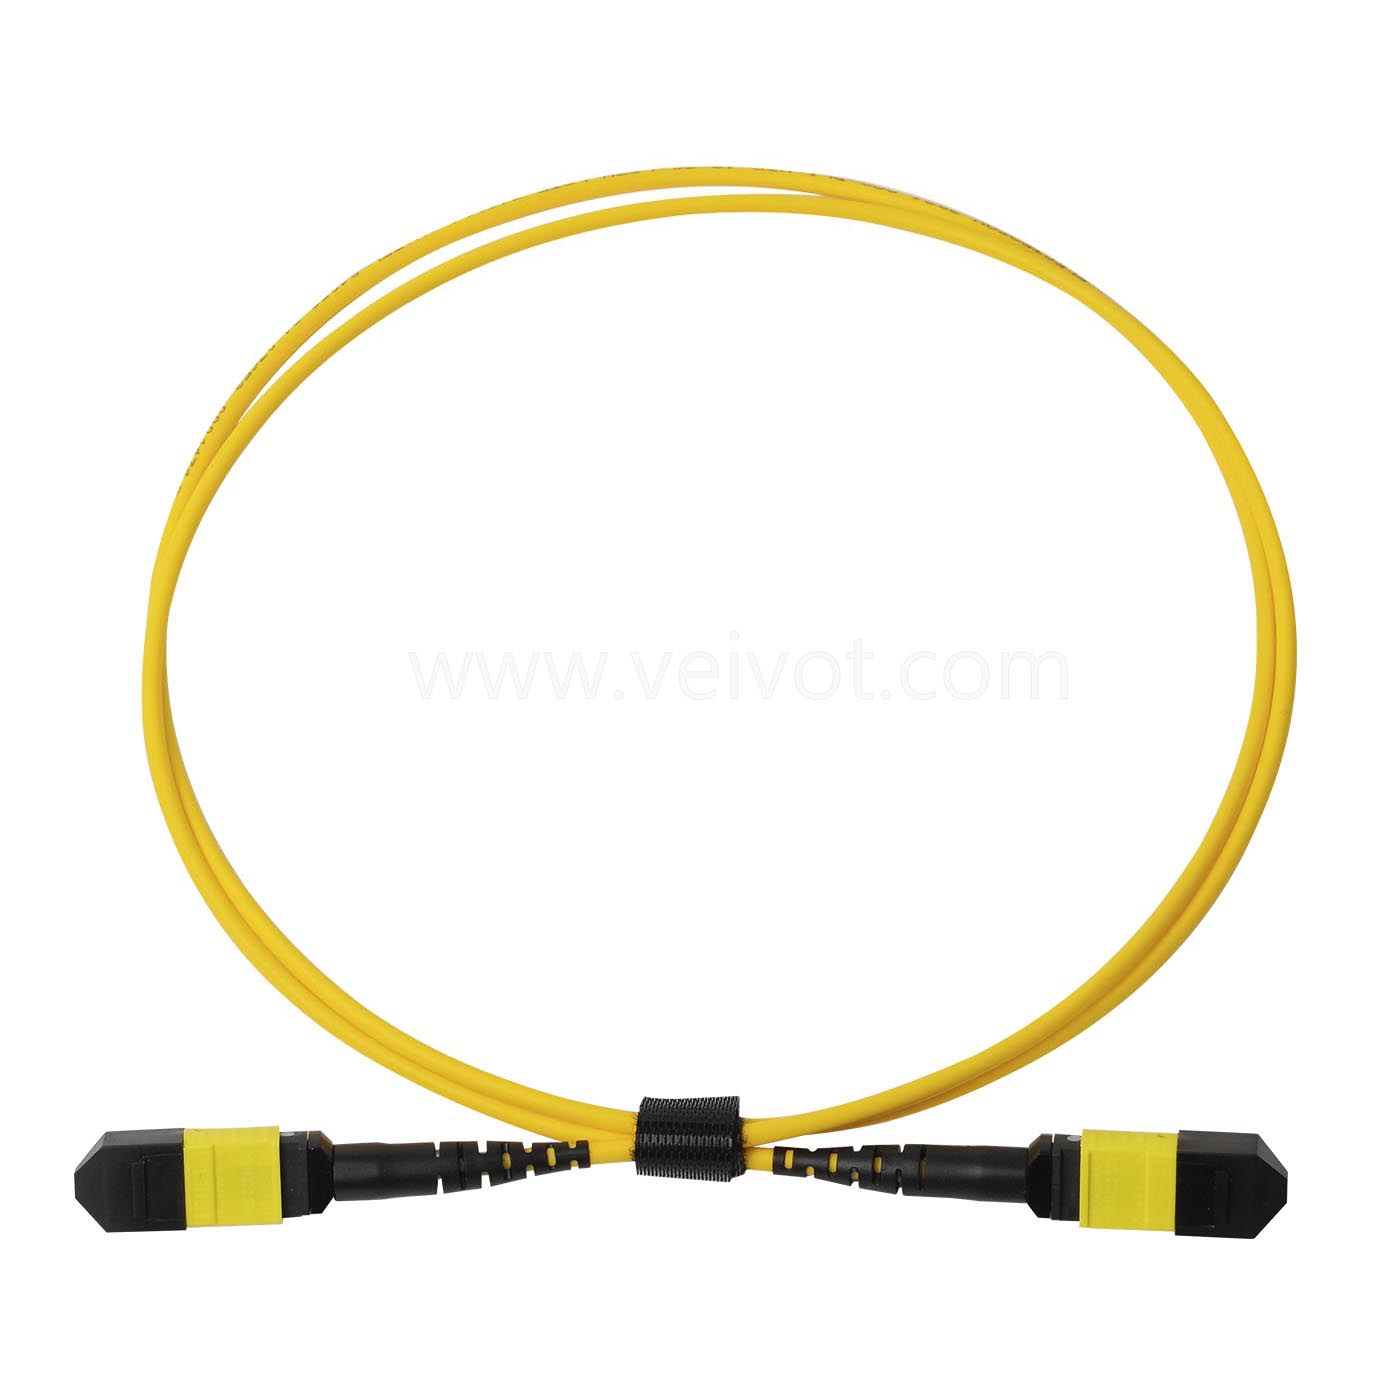 MPO/MPO Trunk Patch Cable OS2 Singlemode